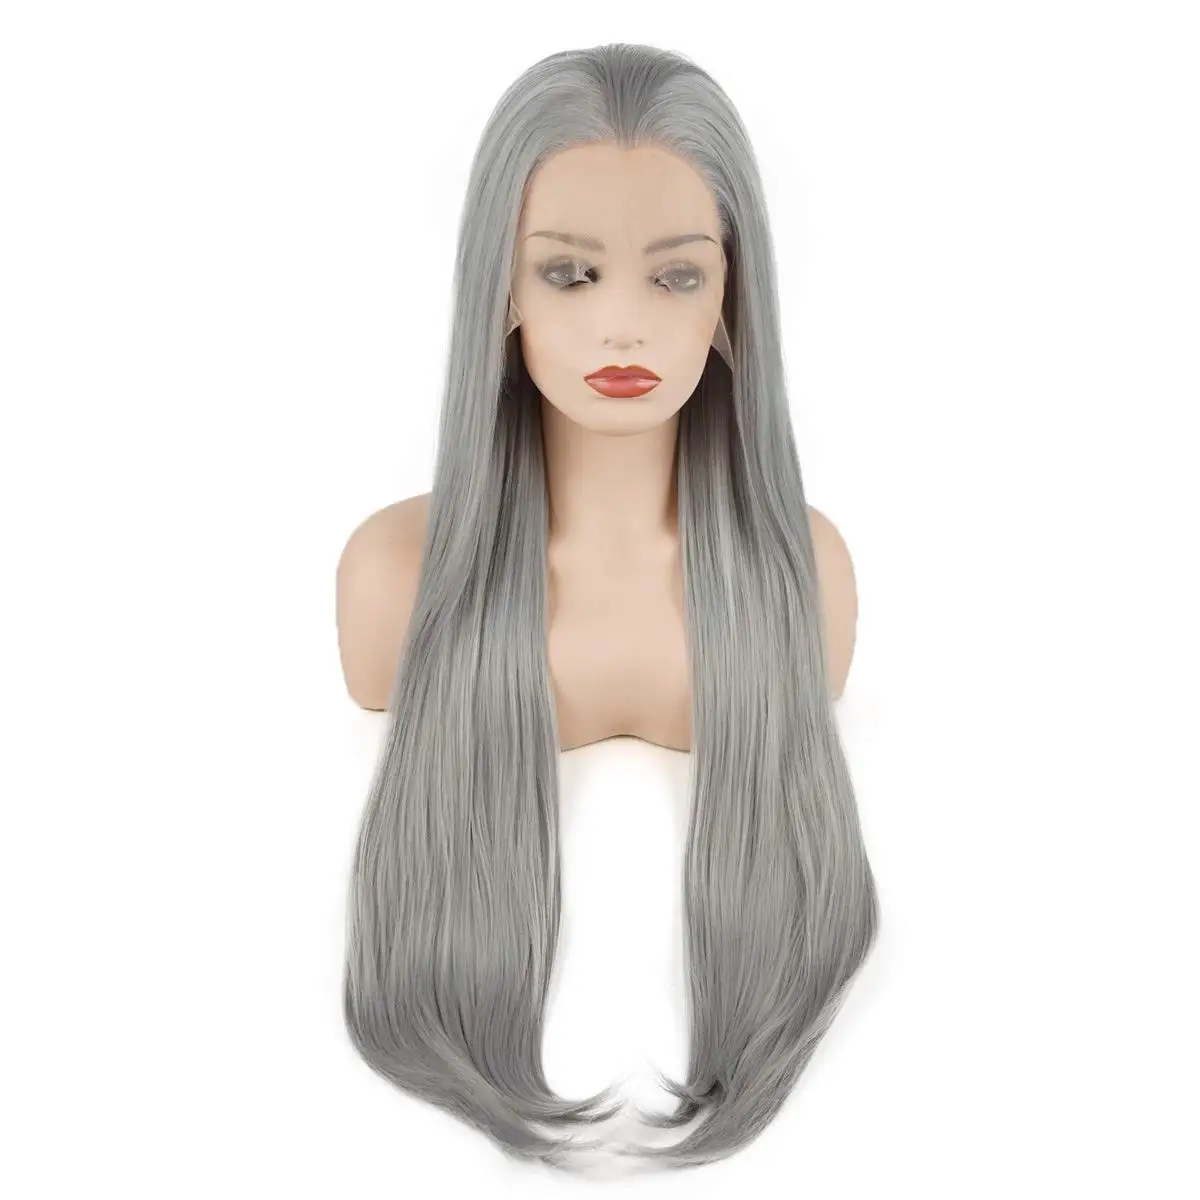 Jeelion Hair Straight Super Long 28inch Grey Heavy Density Half Hand Tied Realistic Synthetic Lace Front Wigs